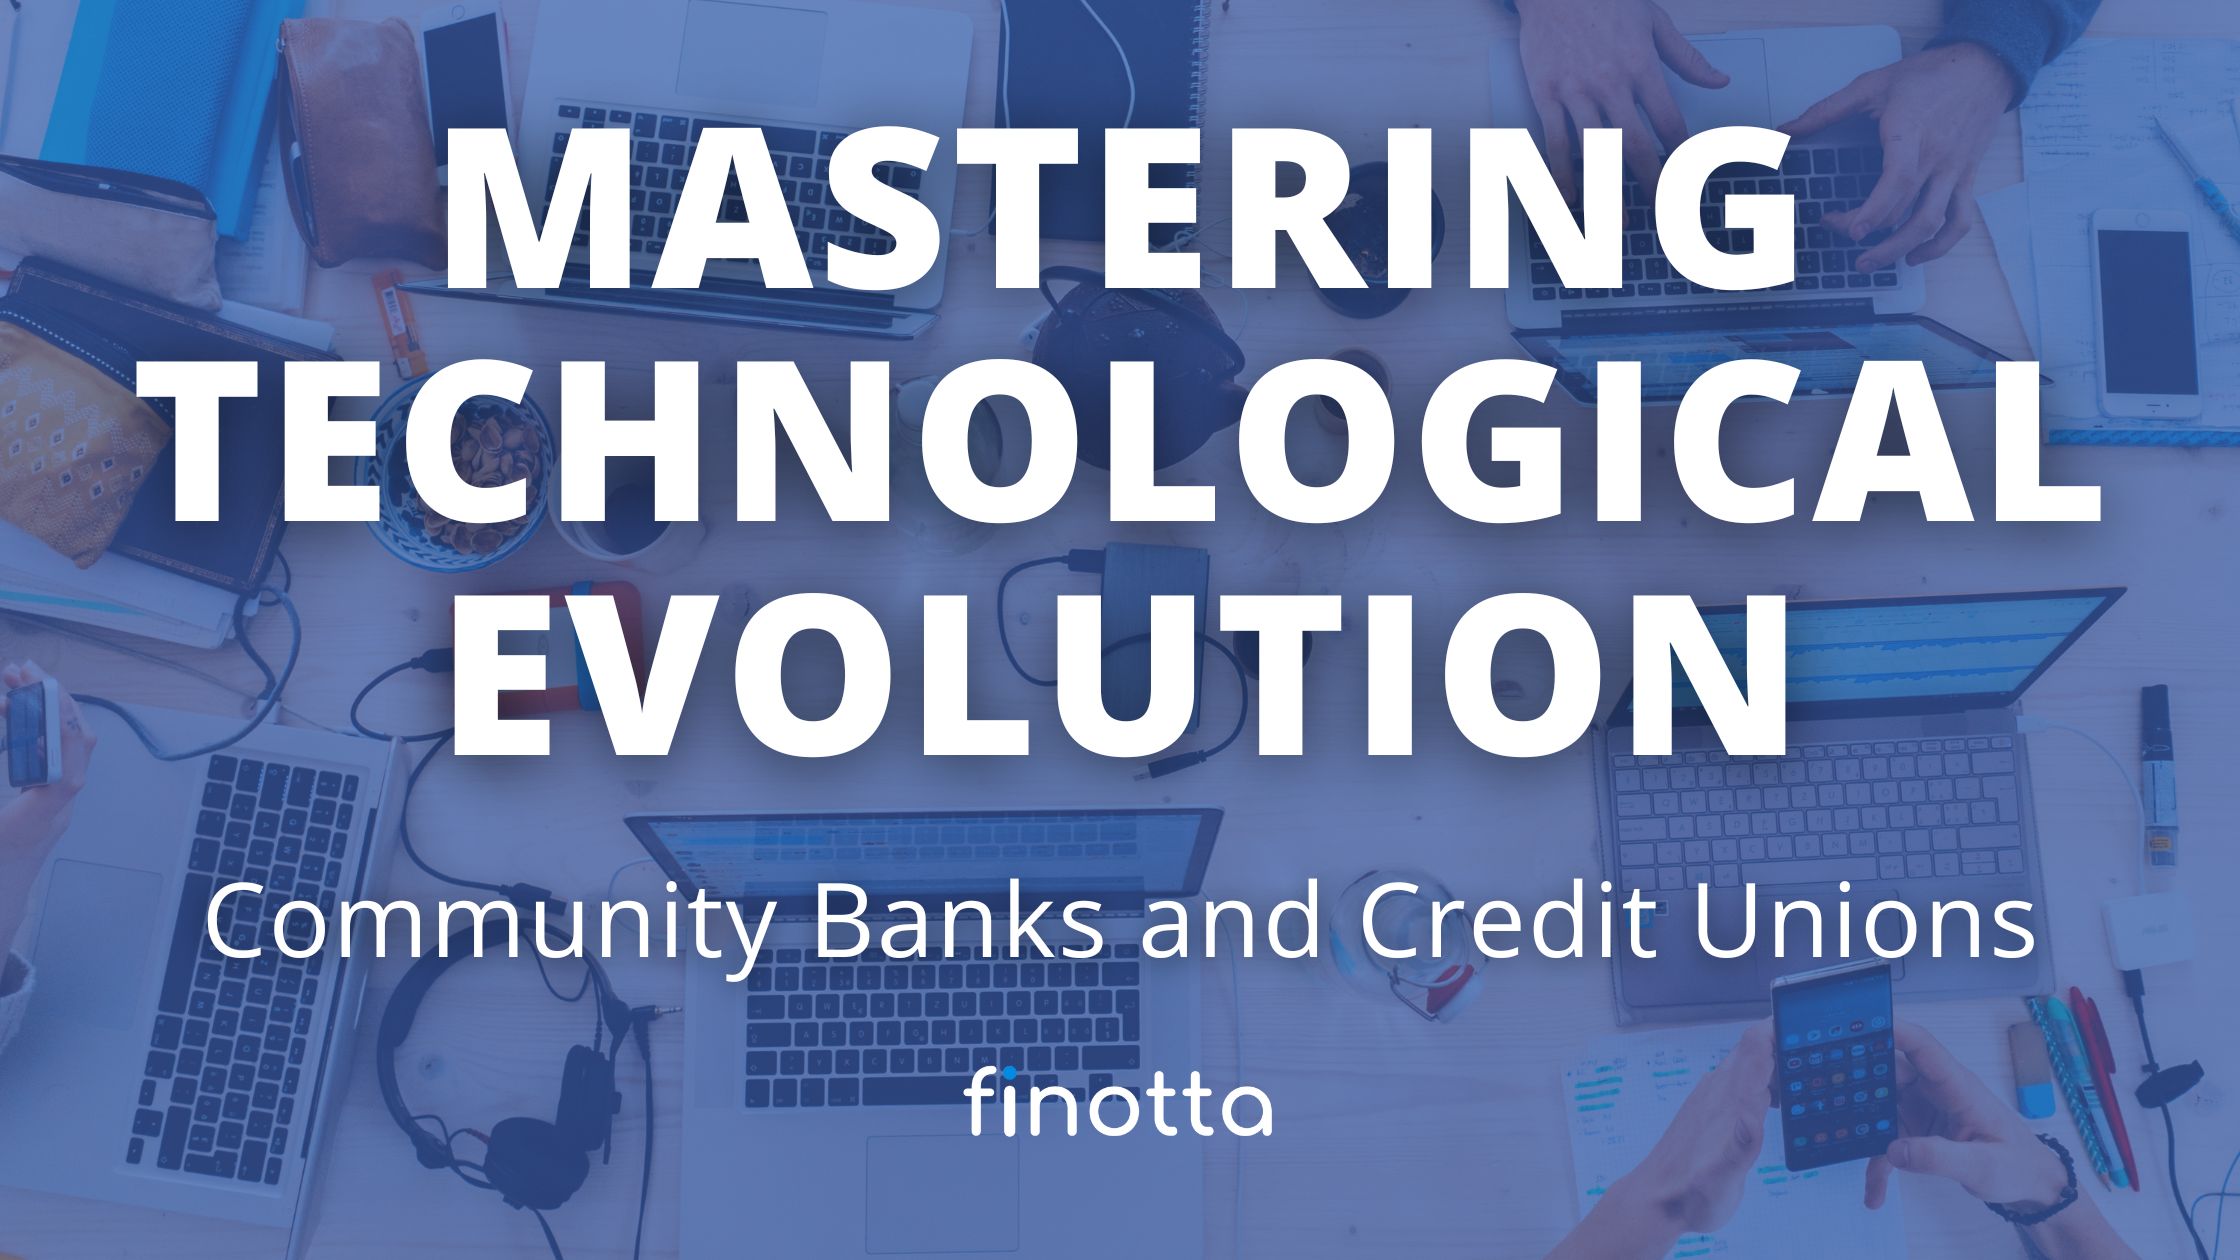 Mastering Technological Evolution: Community Banks and Credit Unions